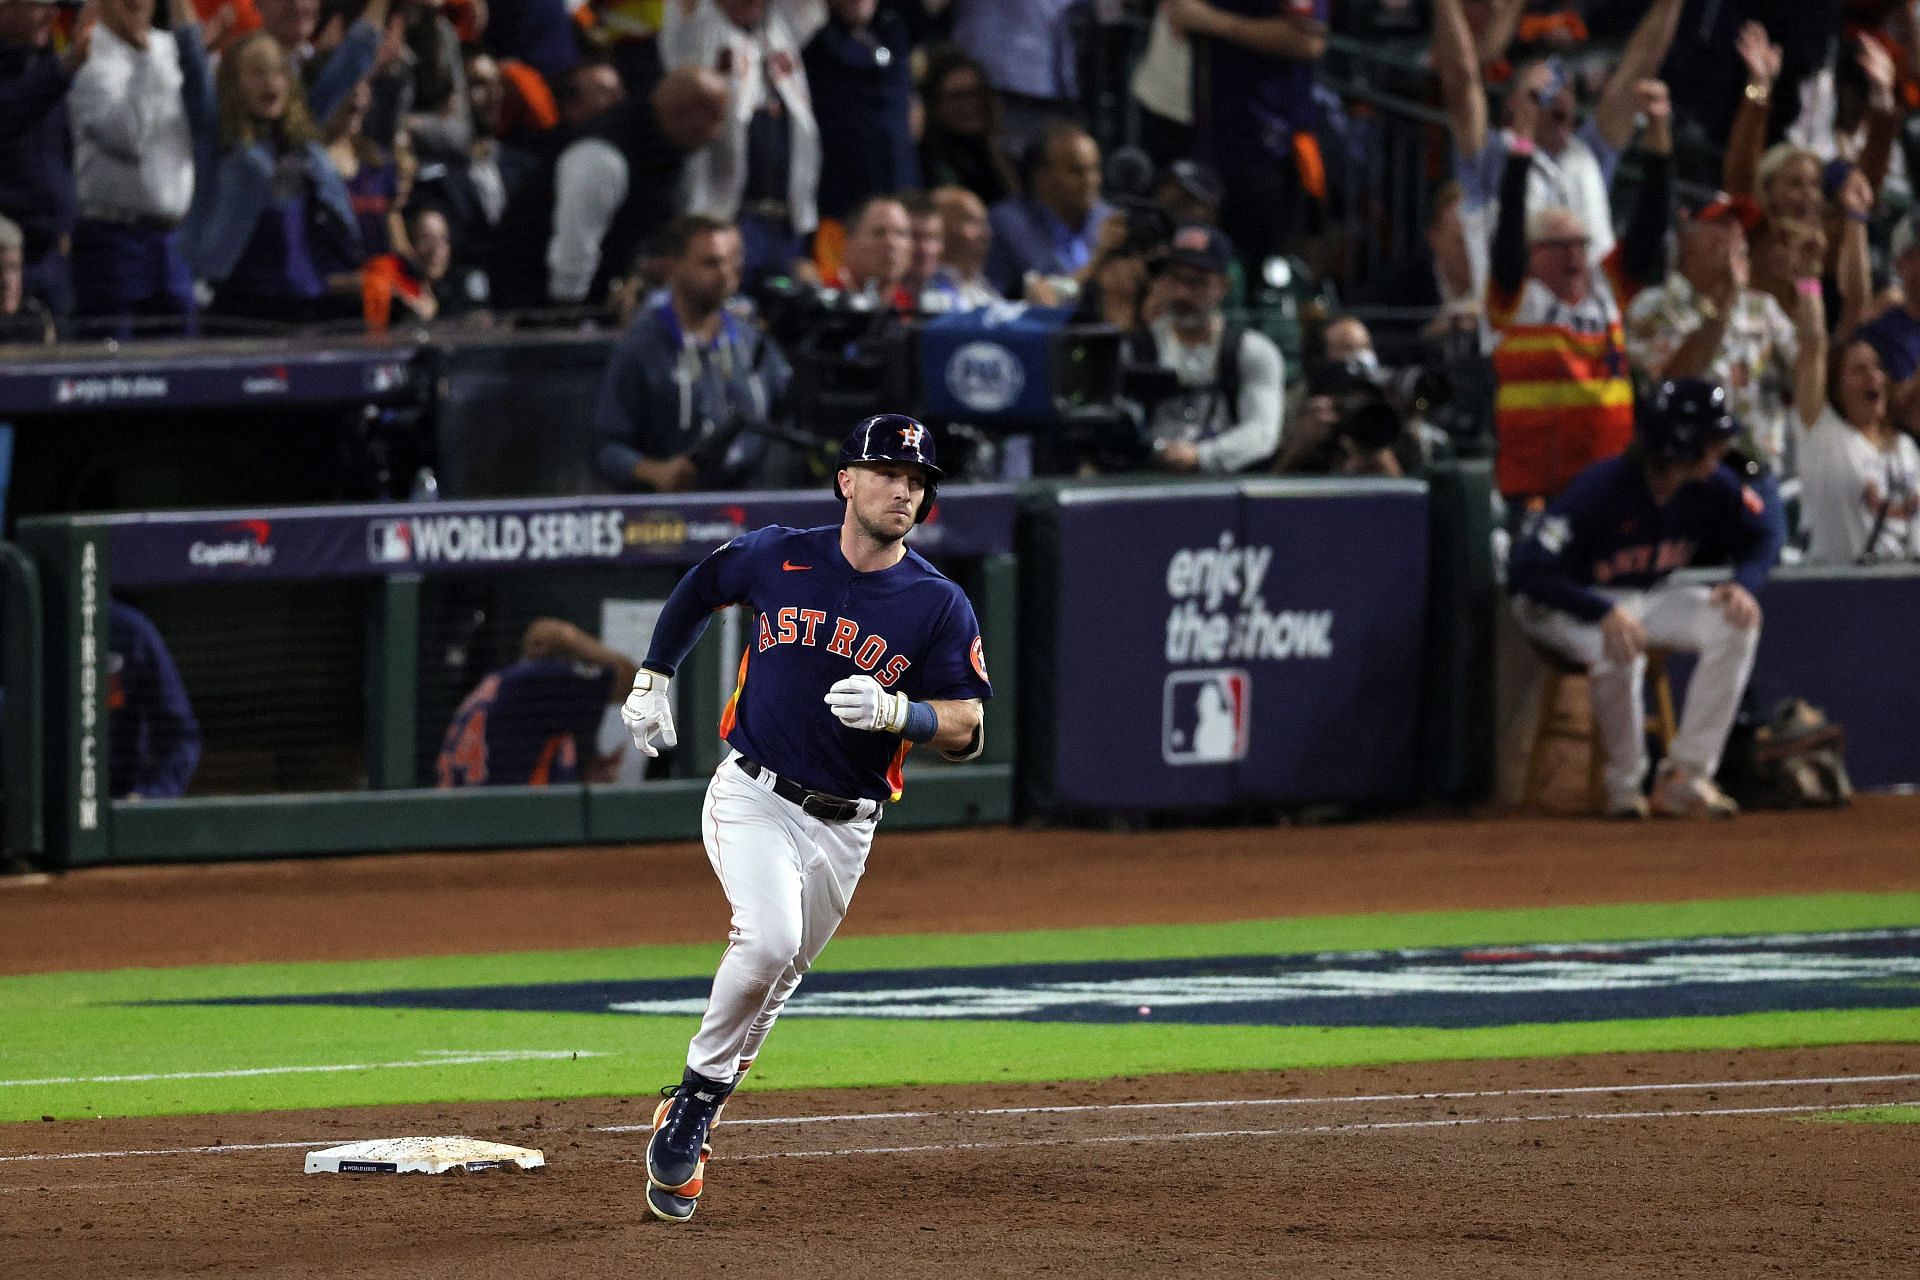 Houston Astros fans amazed as Alex Bregman continues his red-hot form in  the World Series as he smashed 2-run HR to put the Astros up 5-0